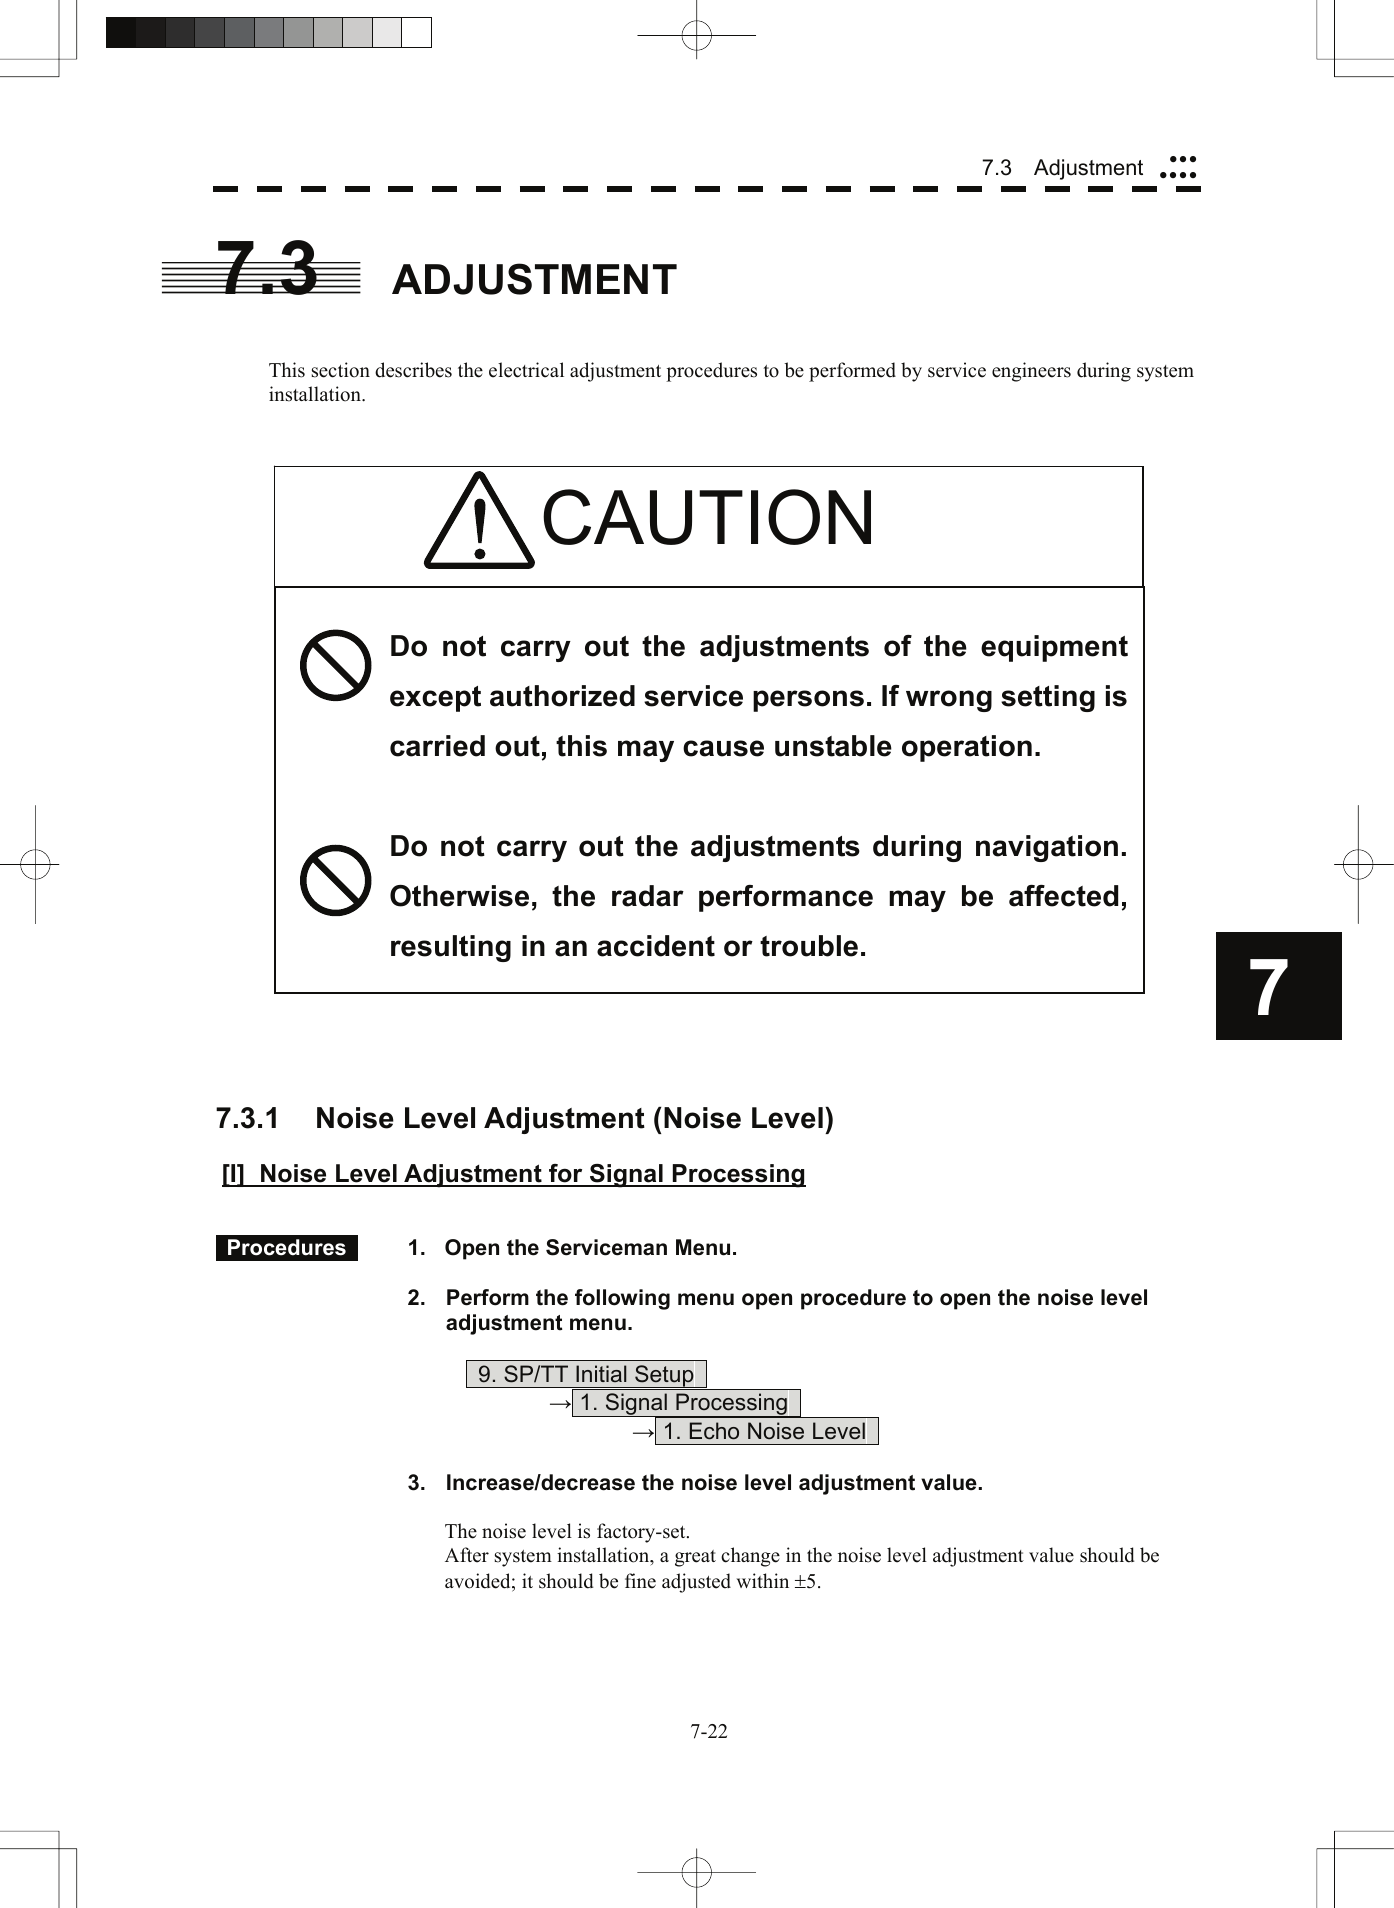  77.3  Adjustment yyyyyyy7.3 ADJUSTMENT   This section describes the electrical adjustment procedures to be performed by service engineers during system installation.    CAUTION                        Do not carry out the adjustments of the equipment except authorized service persons. If wrong setting is carried out, this may cause unstable operation.  Do not carry out the adjustments during navigation. Otherwise, the radar performance may be affected, resulting in an accident or trouble.     7.3.1  Noise Level Adjustment (Noise Level)  [I] Noise Level Adjustment for Signal Processing    Procedures    1.  Open the Serviceman Menu.  2.  Perform the following menu open procedure to open the noise level adjustment menu.          9. SP/TT Initial Setup       → 1. Signal Processing        → 1. Echo Noise Level    3.  Increase/decrease the noise level adjustment value.  The noise level is factory-set. After system installation, a great change in the noise level adjustment value should be avoided; it should be fine adjusted within ±5. 7-22 